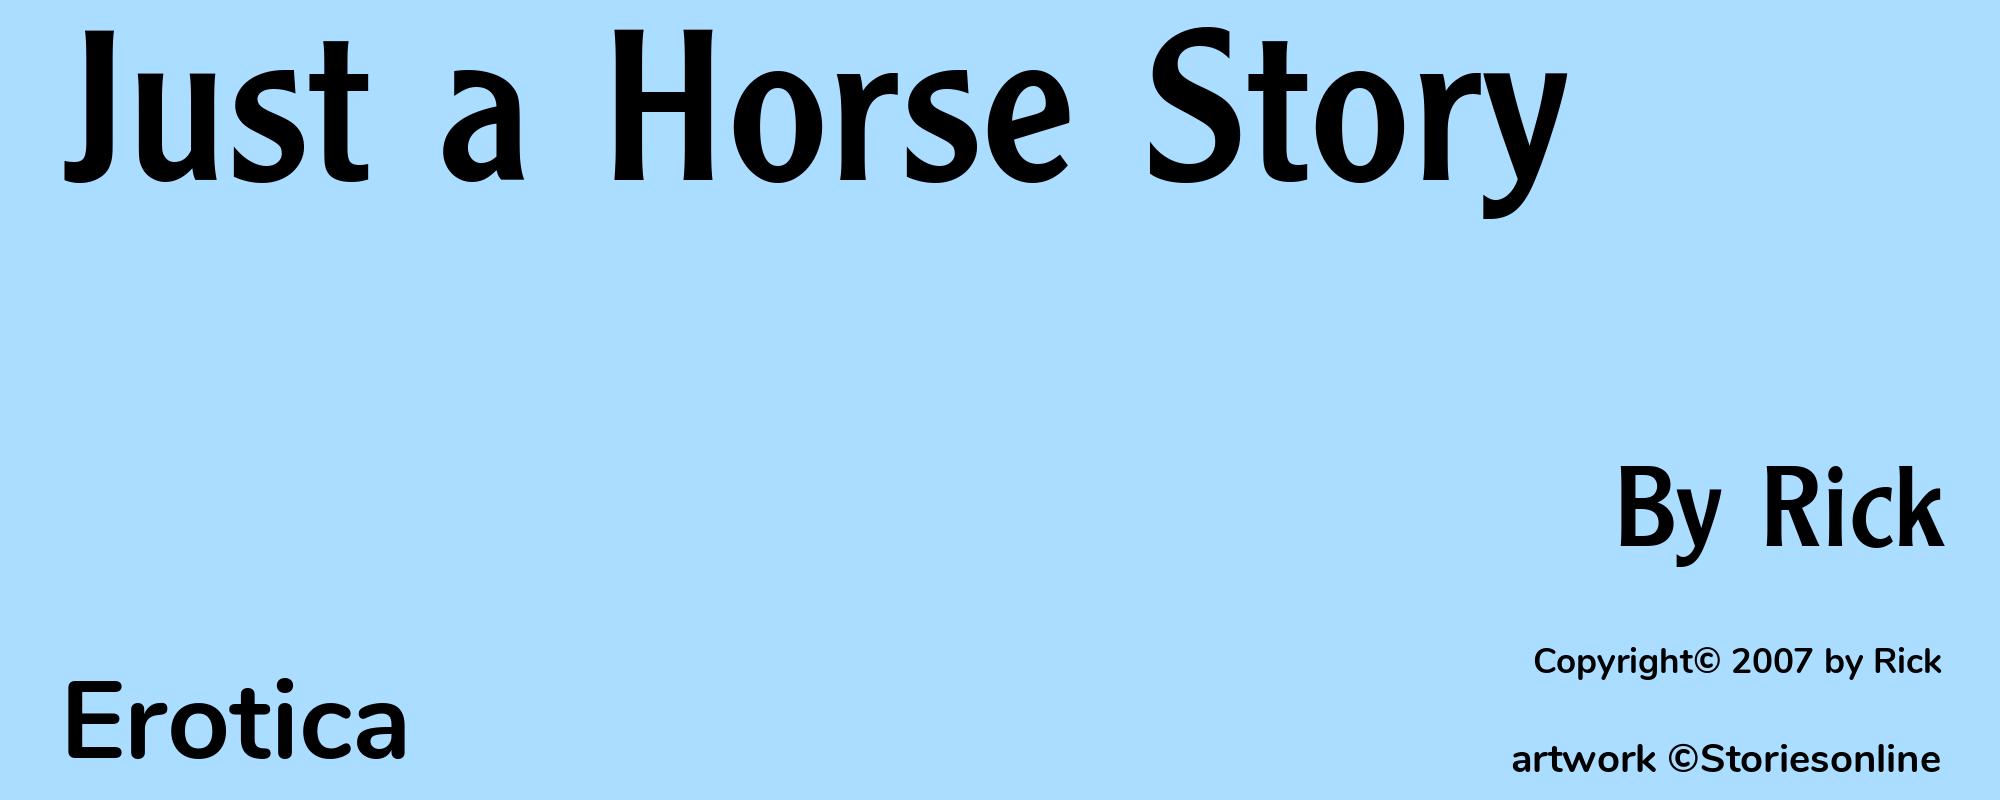 Just a Horse Story - Cover